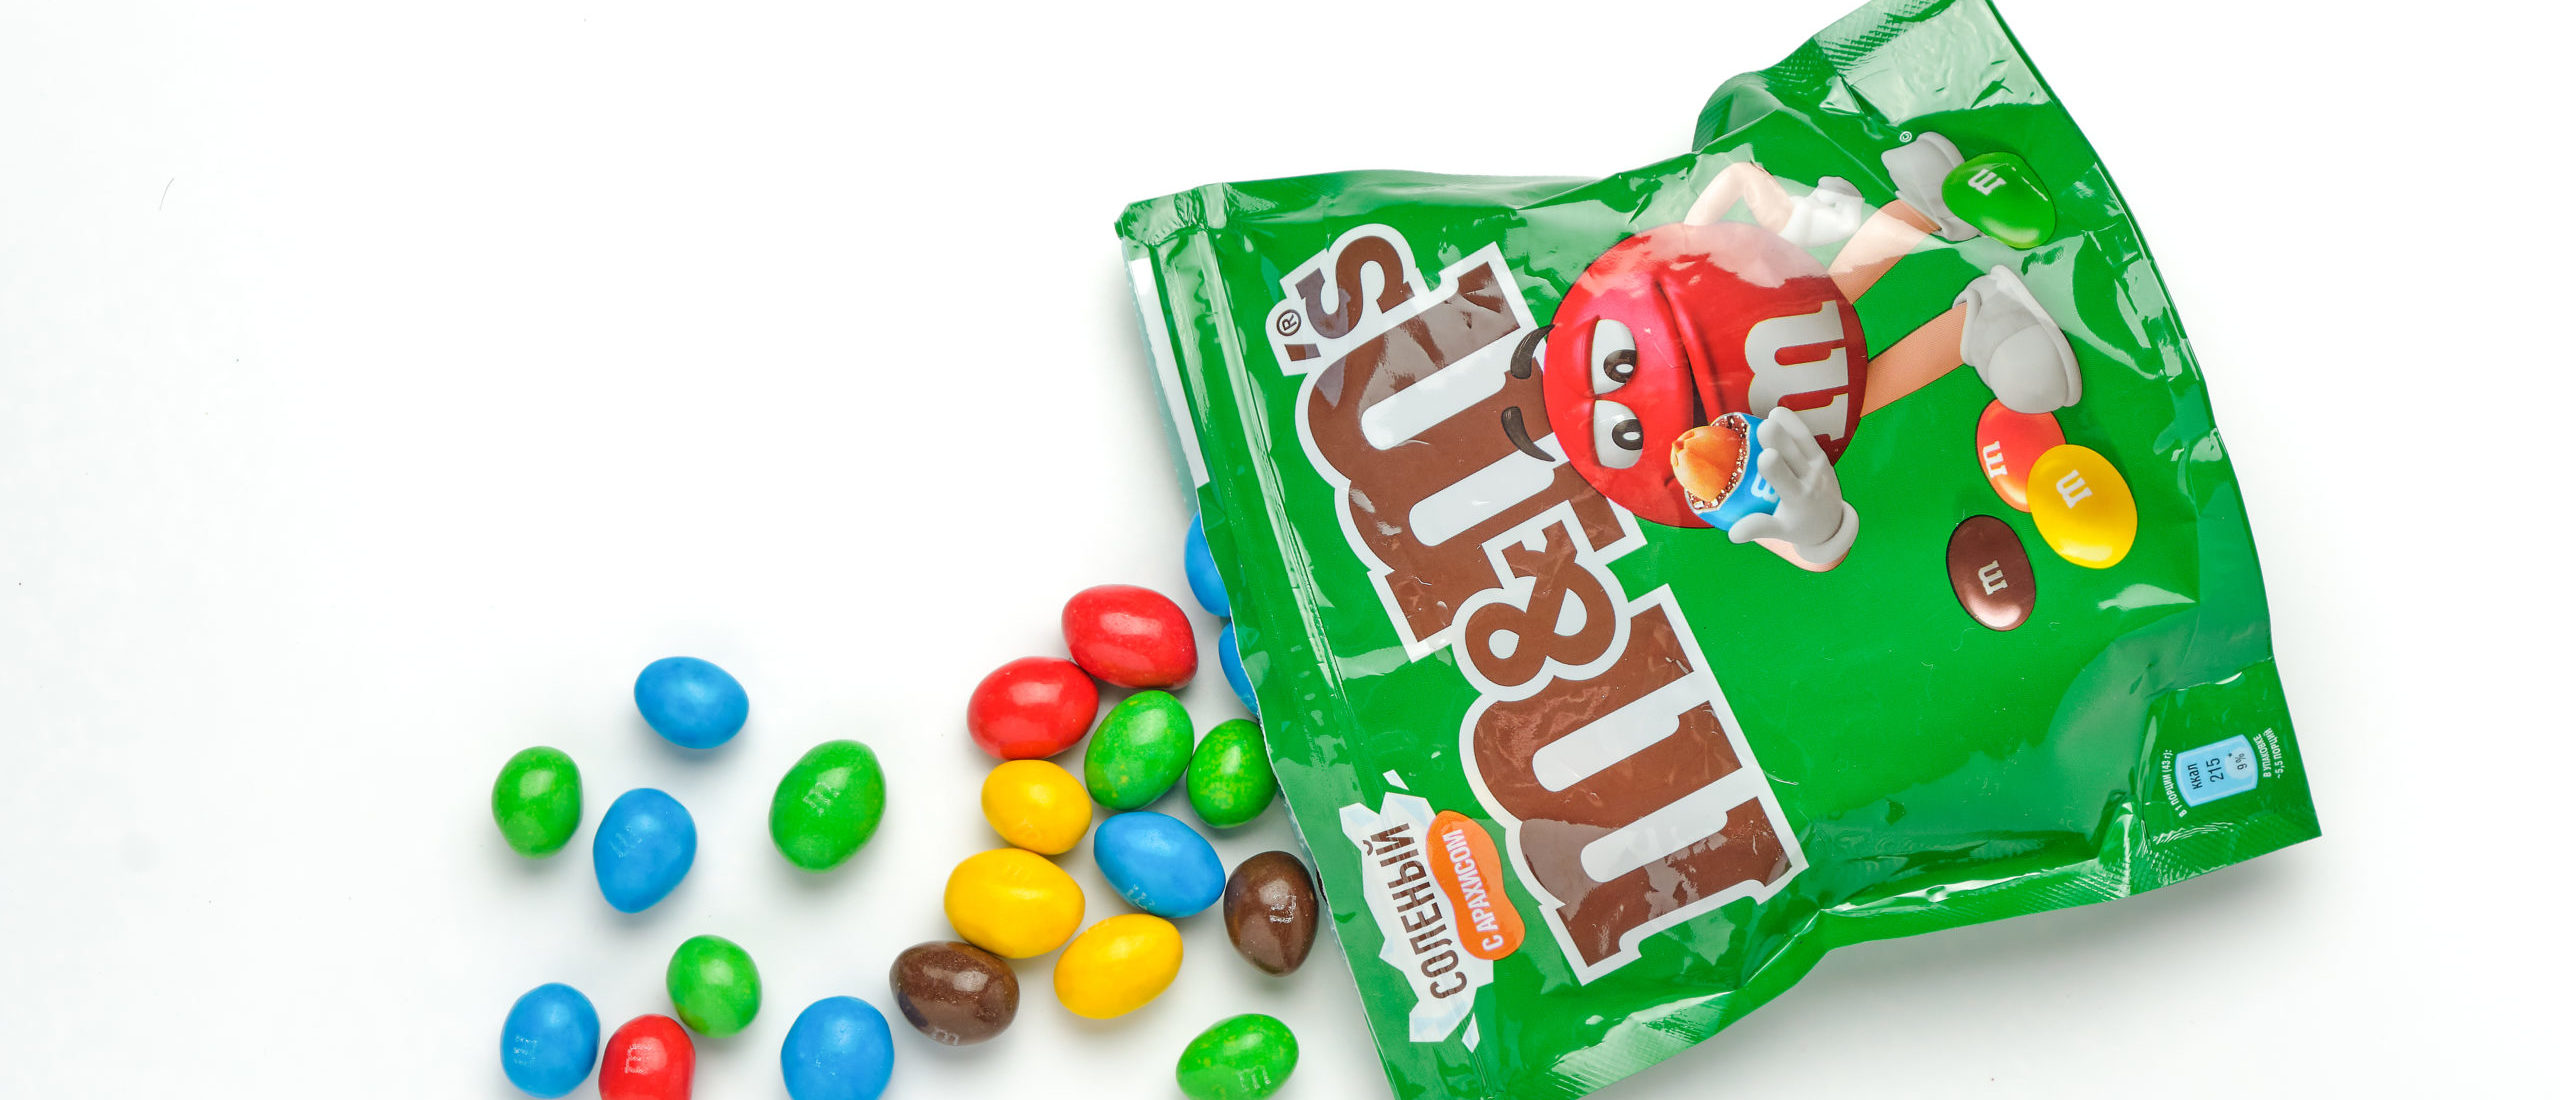 green M&M's character swaps iconic go-go boots for sneakers in